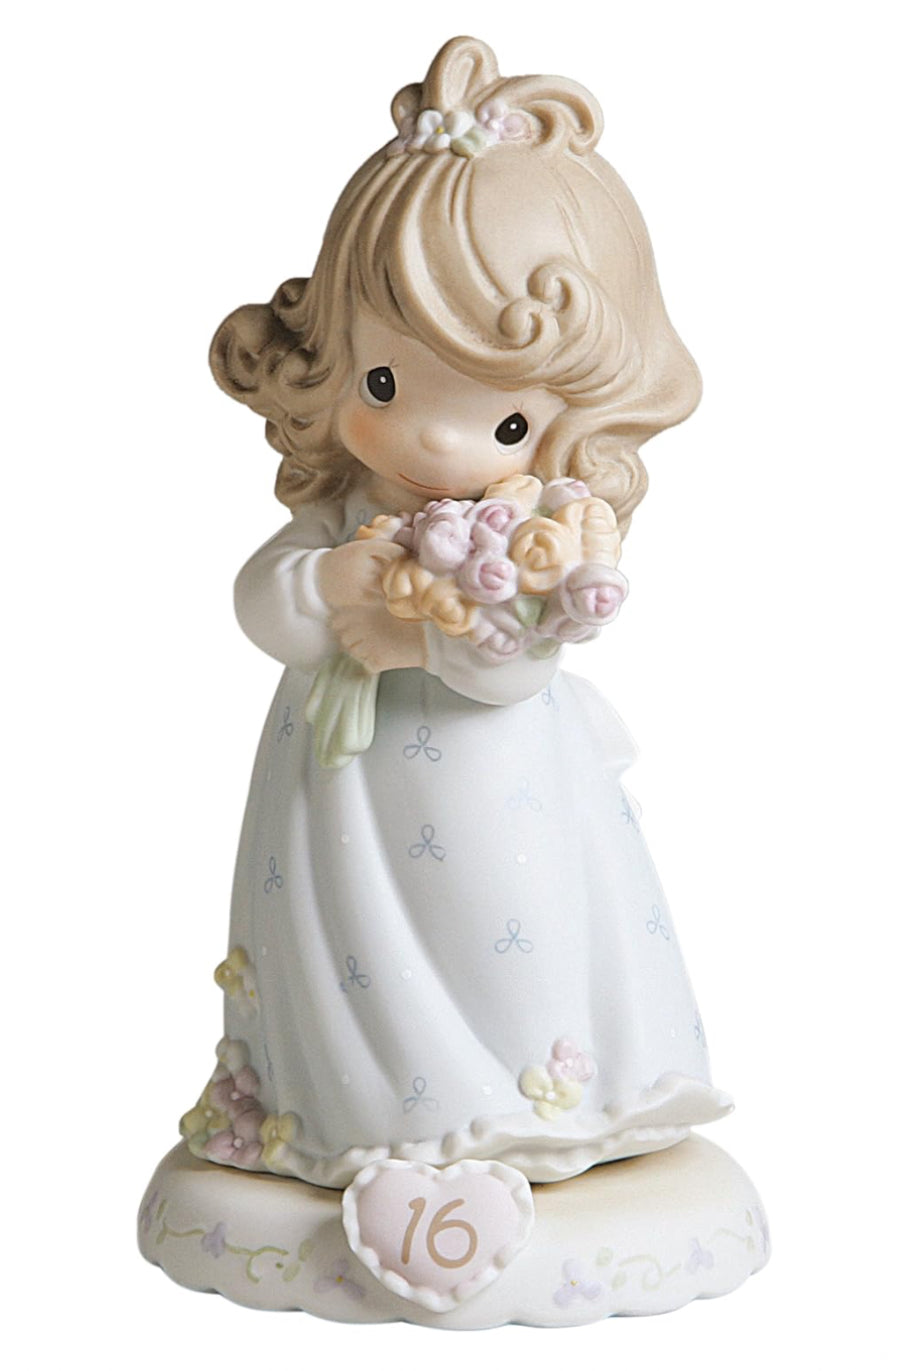 Growing in Grace Age 16 - Precious Moment Figurine 136263